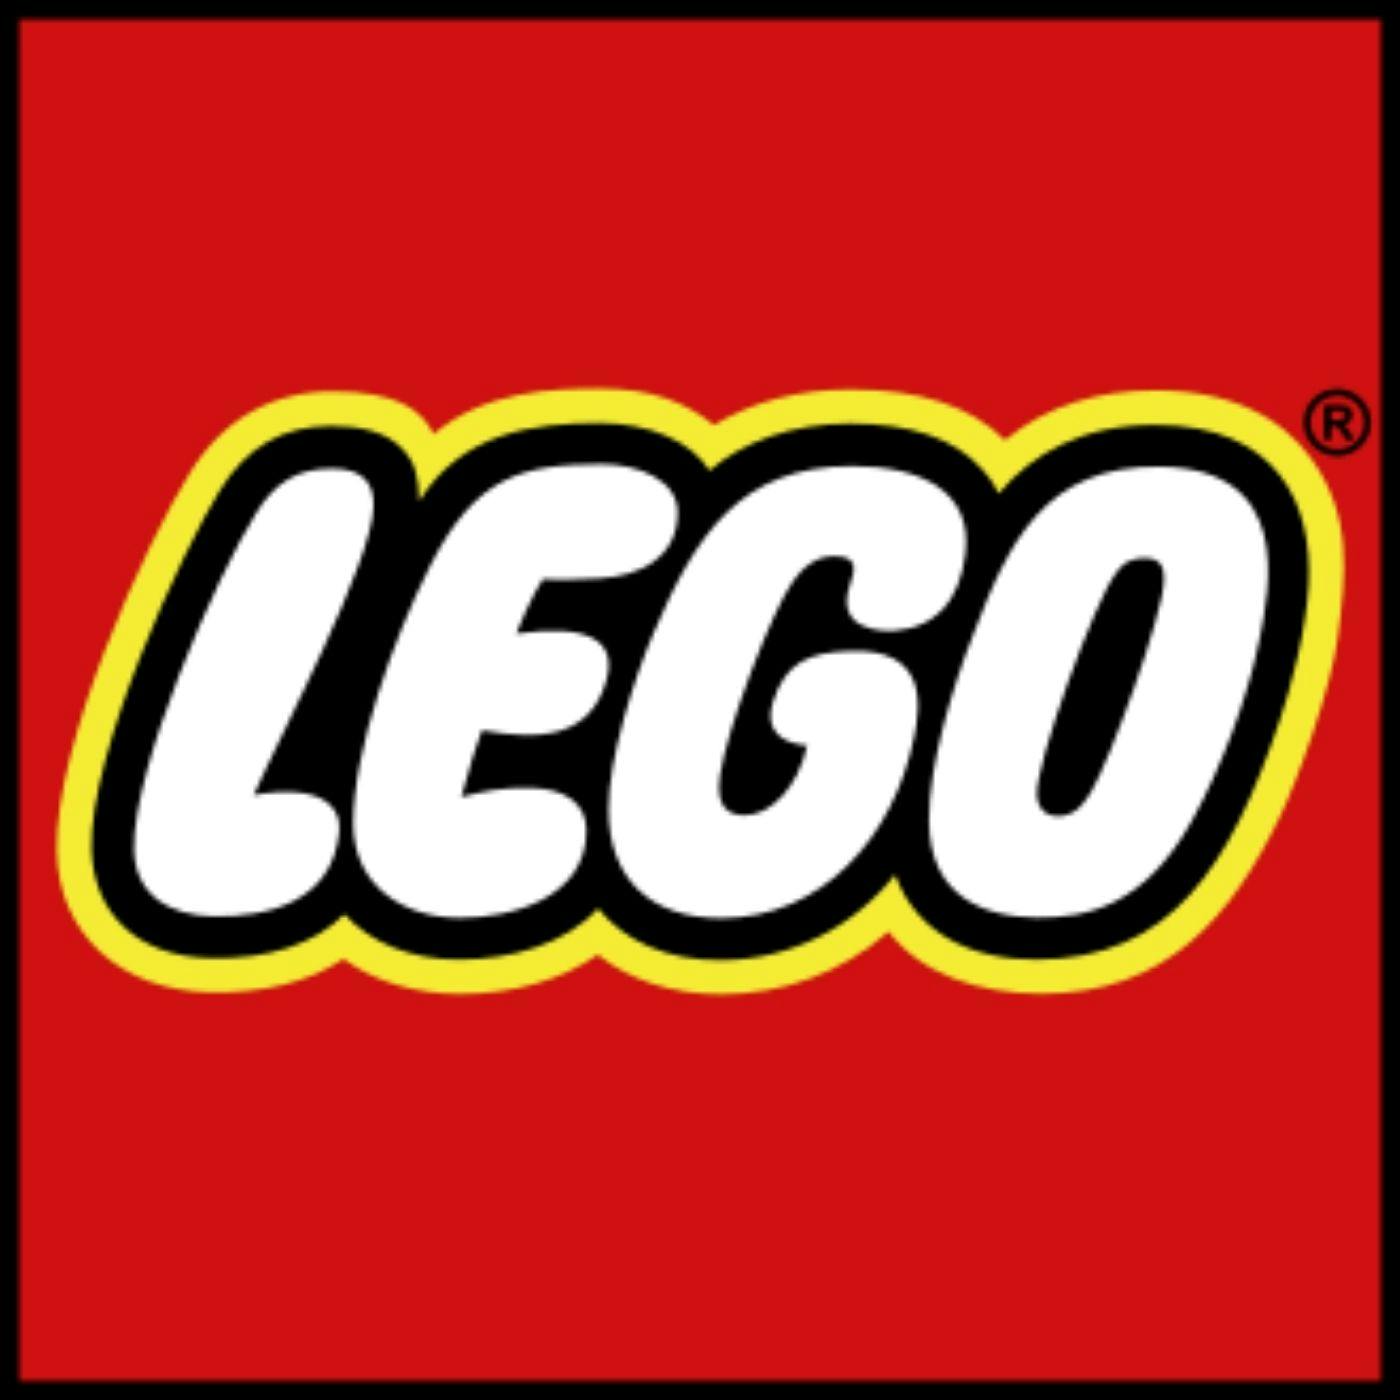 What is Lego ?